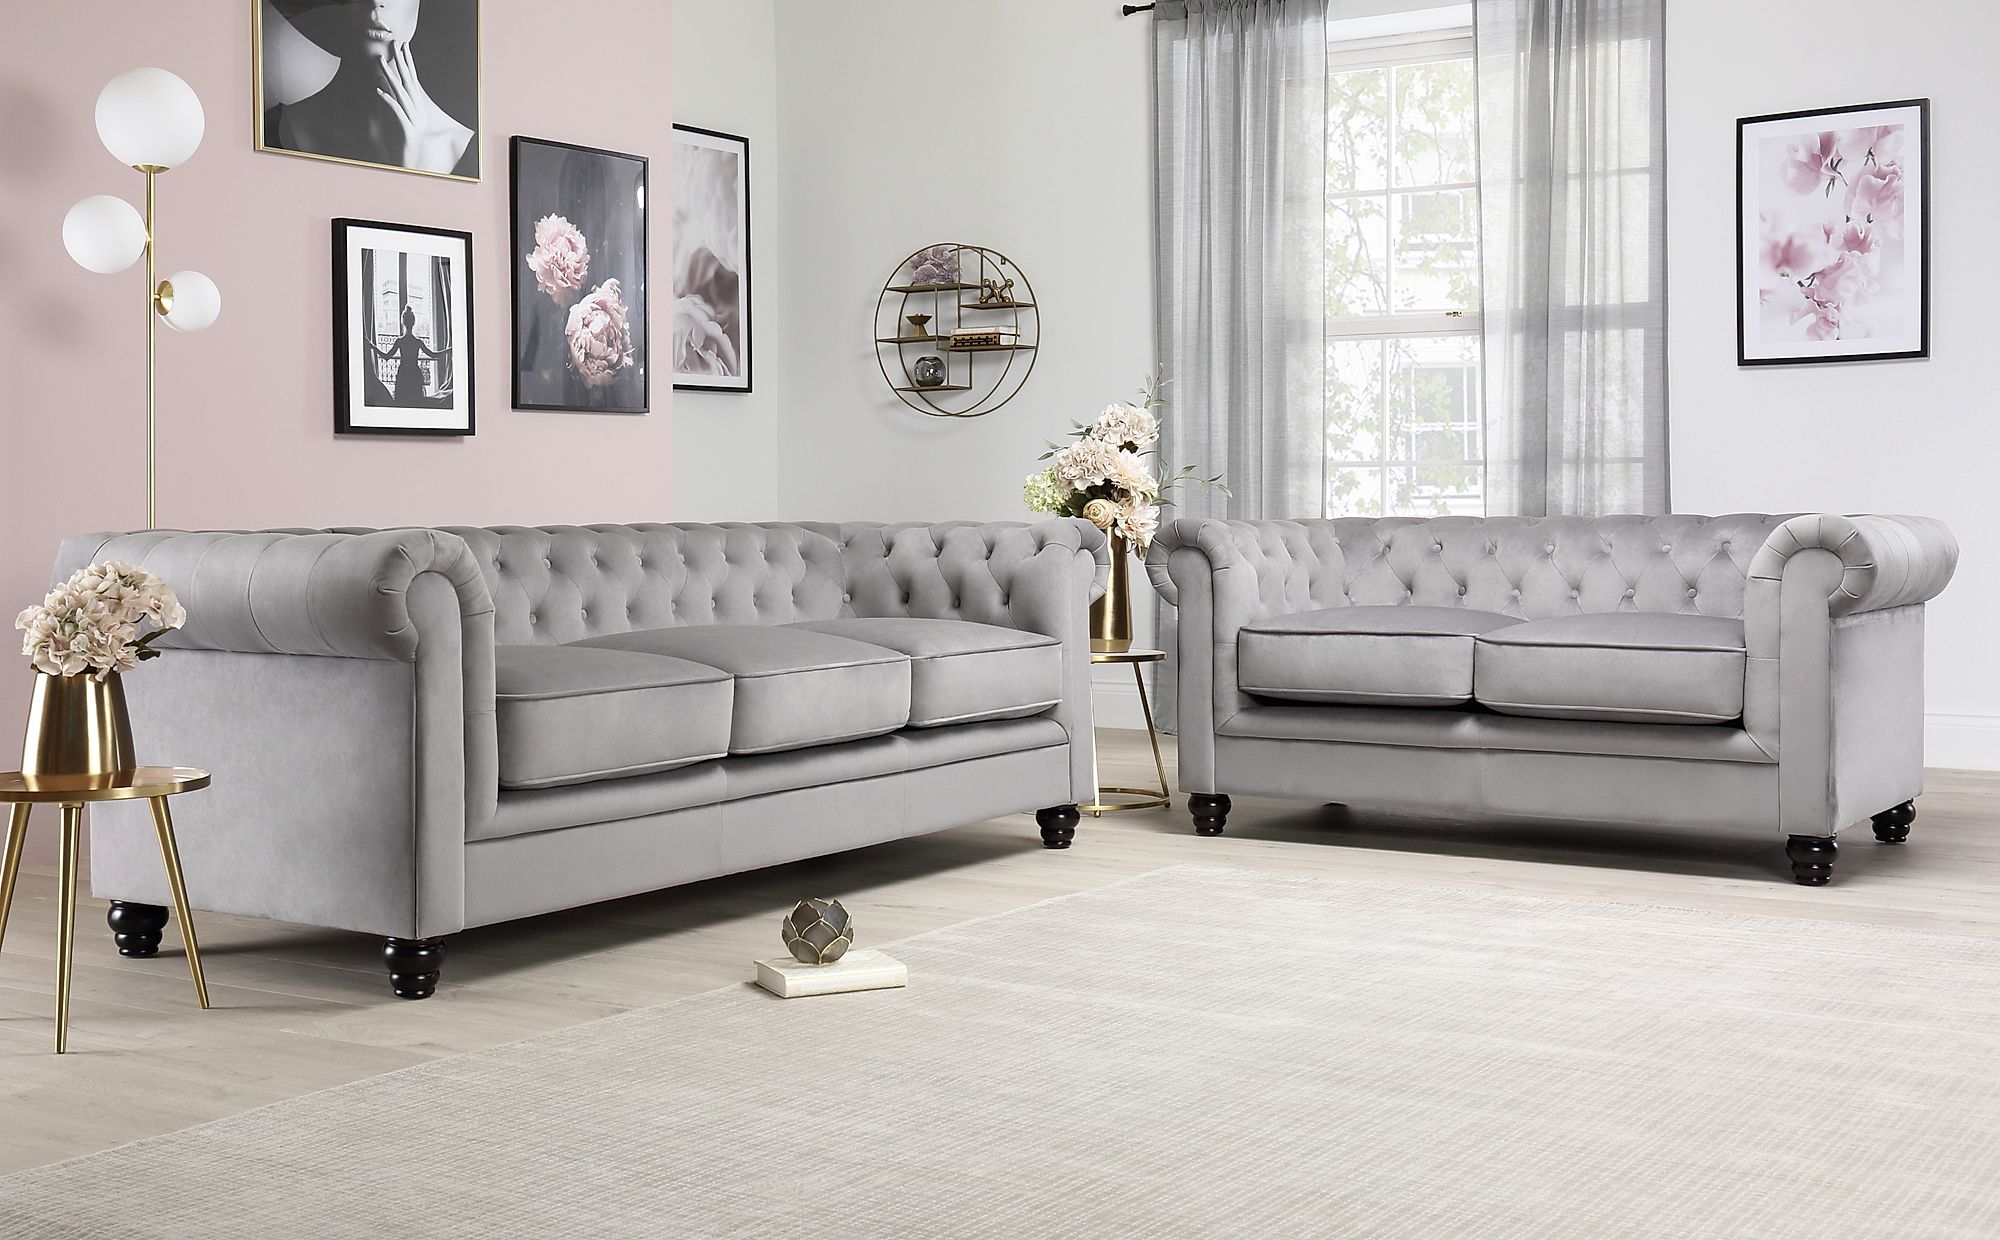 chesterfield style sofa bed uk